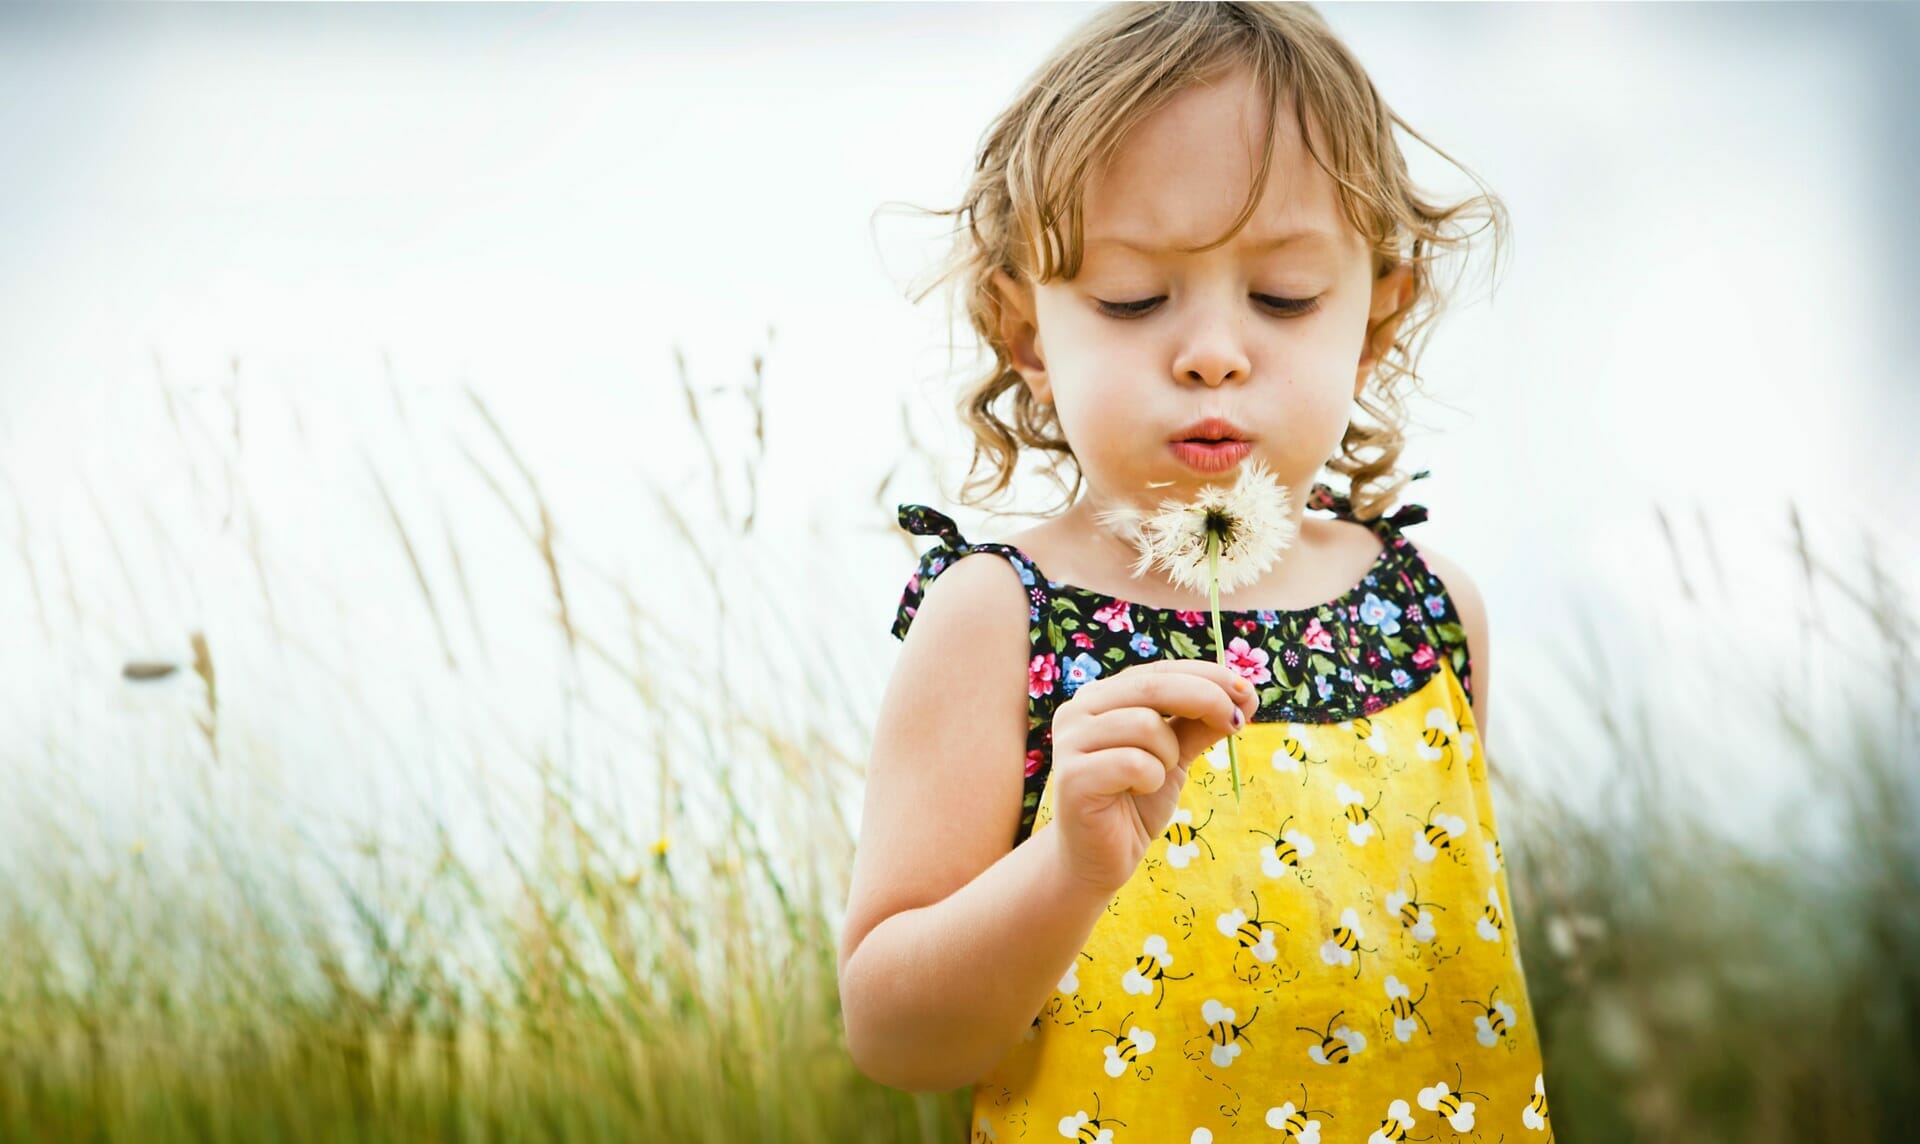 Image of a toddler blowing on a dandelion in a field